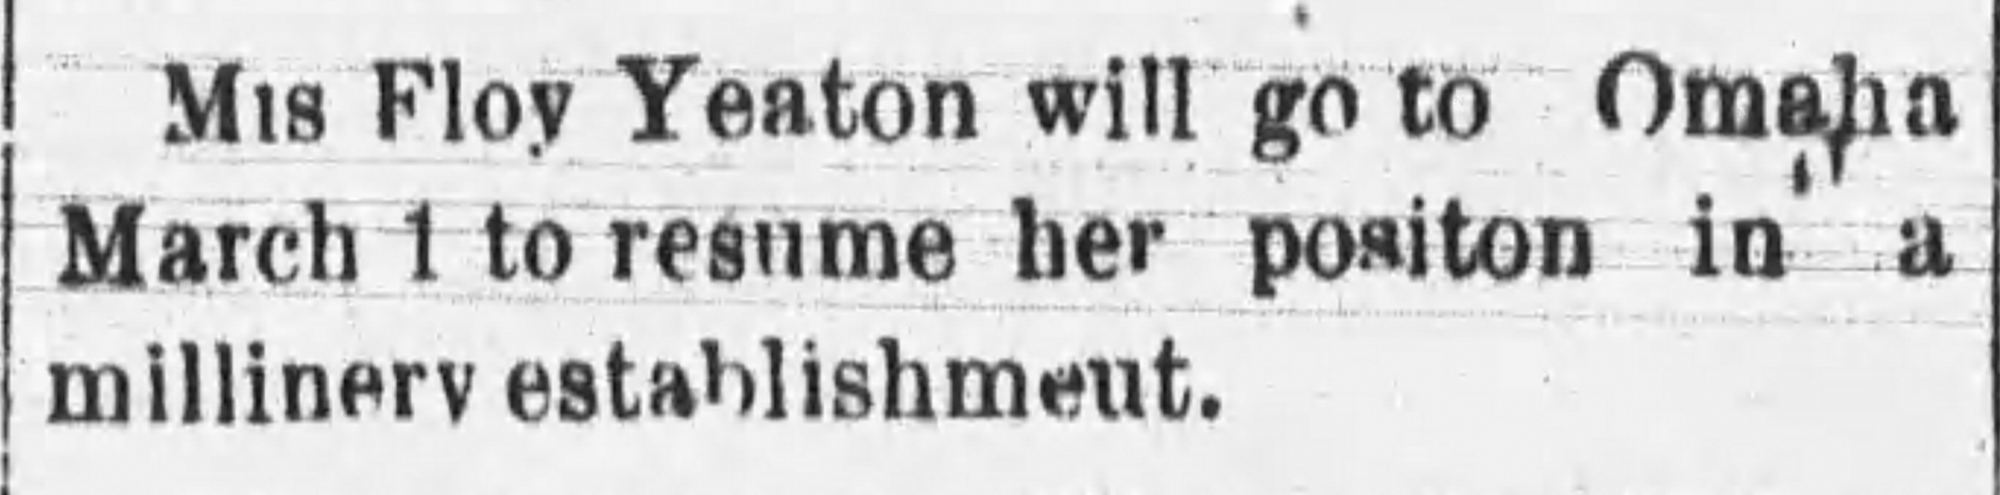 Dauth Family Archive - 1898-02-03 - Lyons Mirror - Florence Yeaton Working In Omaha MIllinery